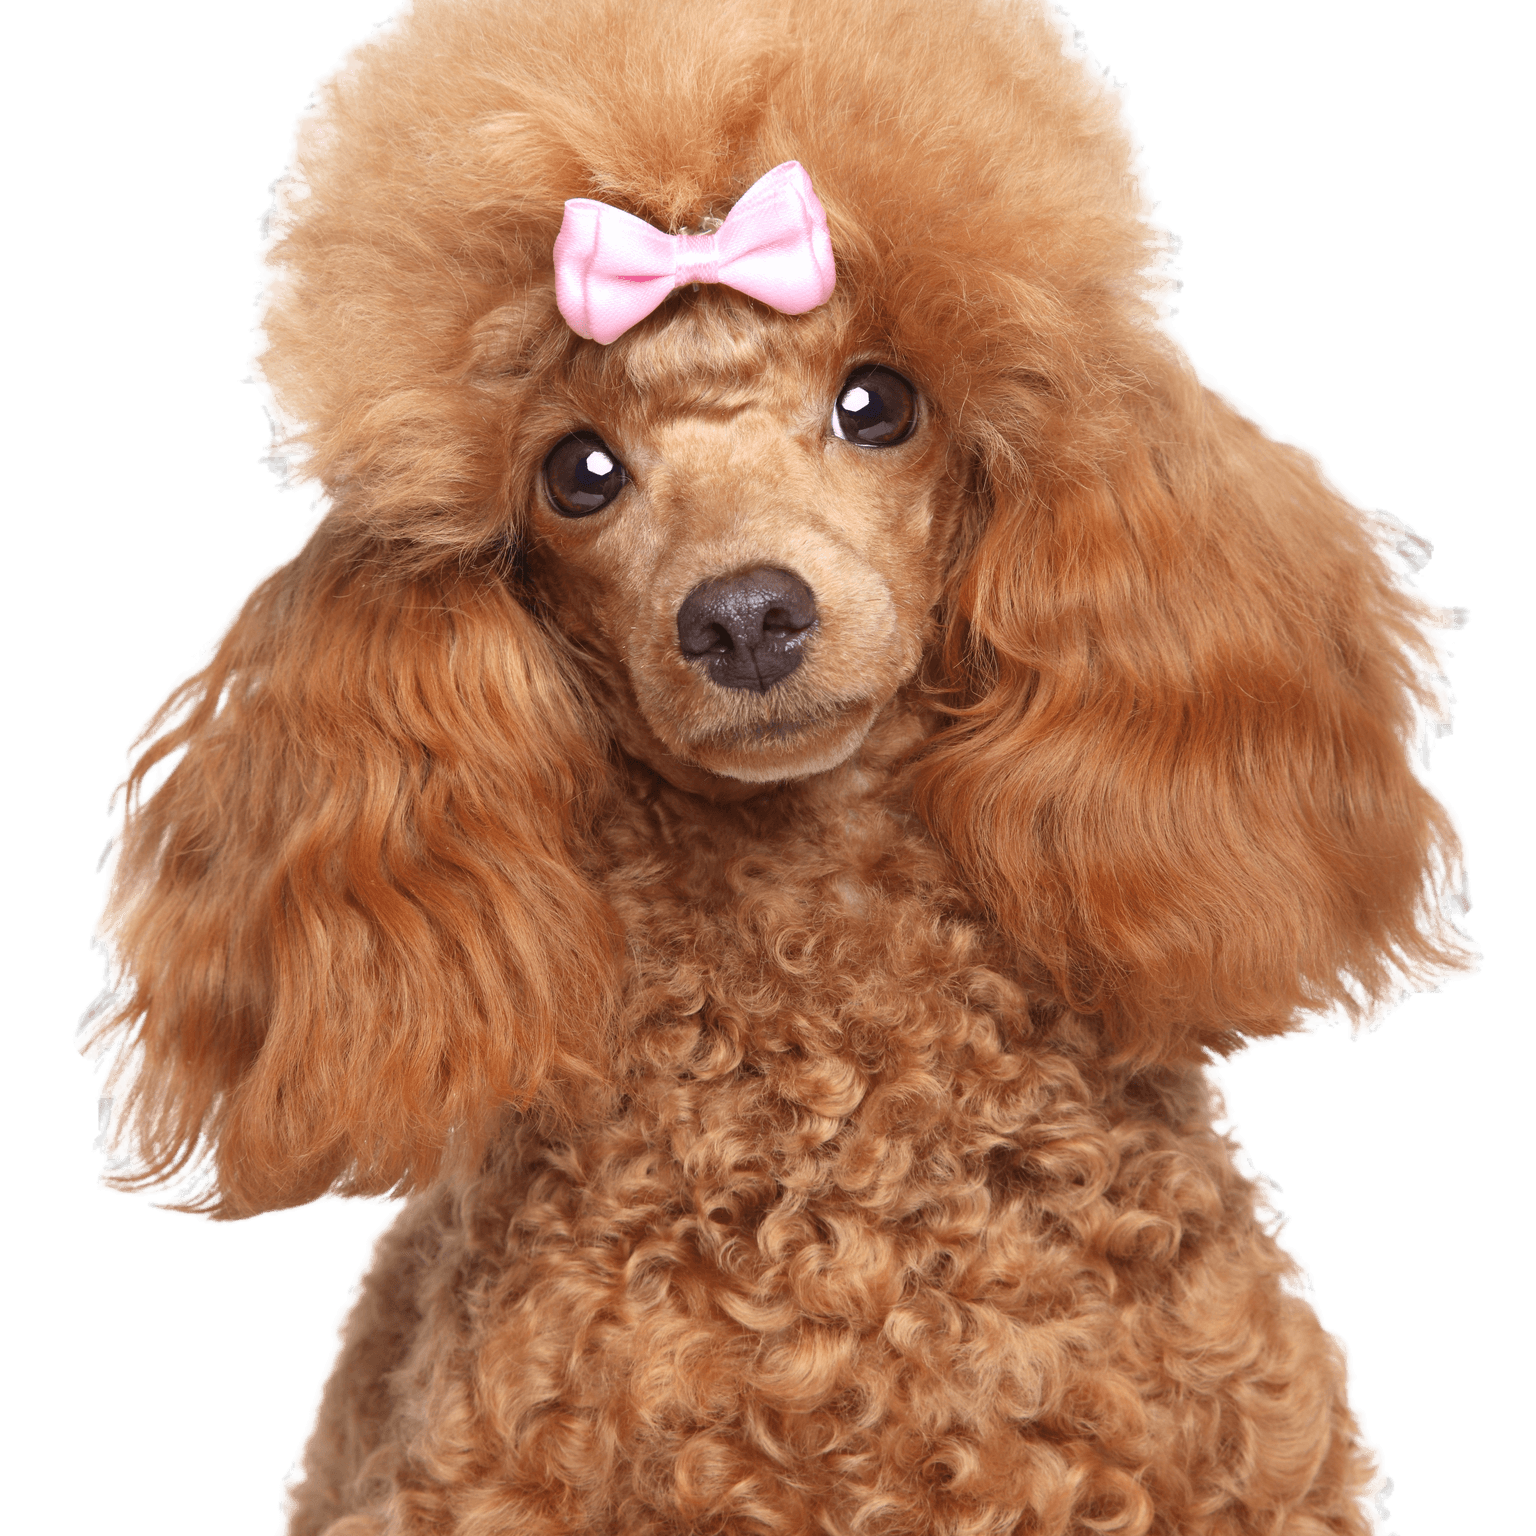 Toy poodle puppy close-up portrait on a white background